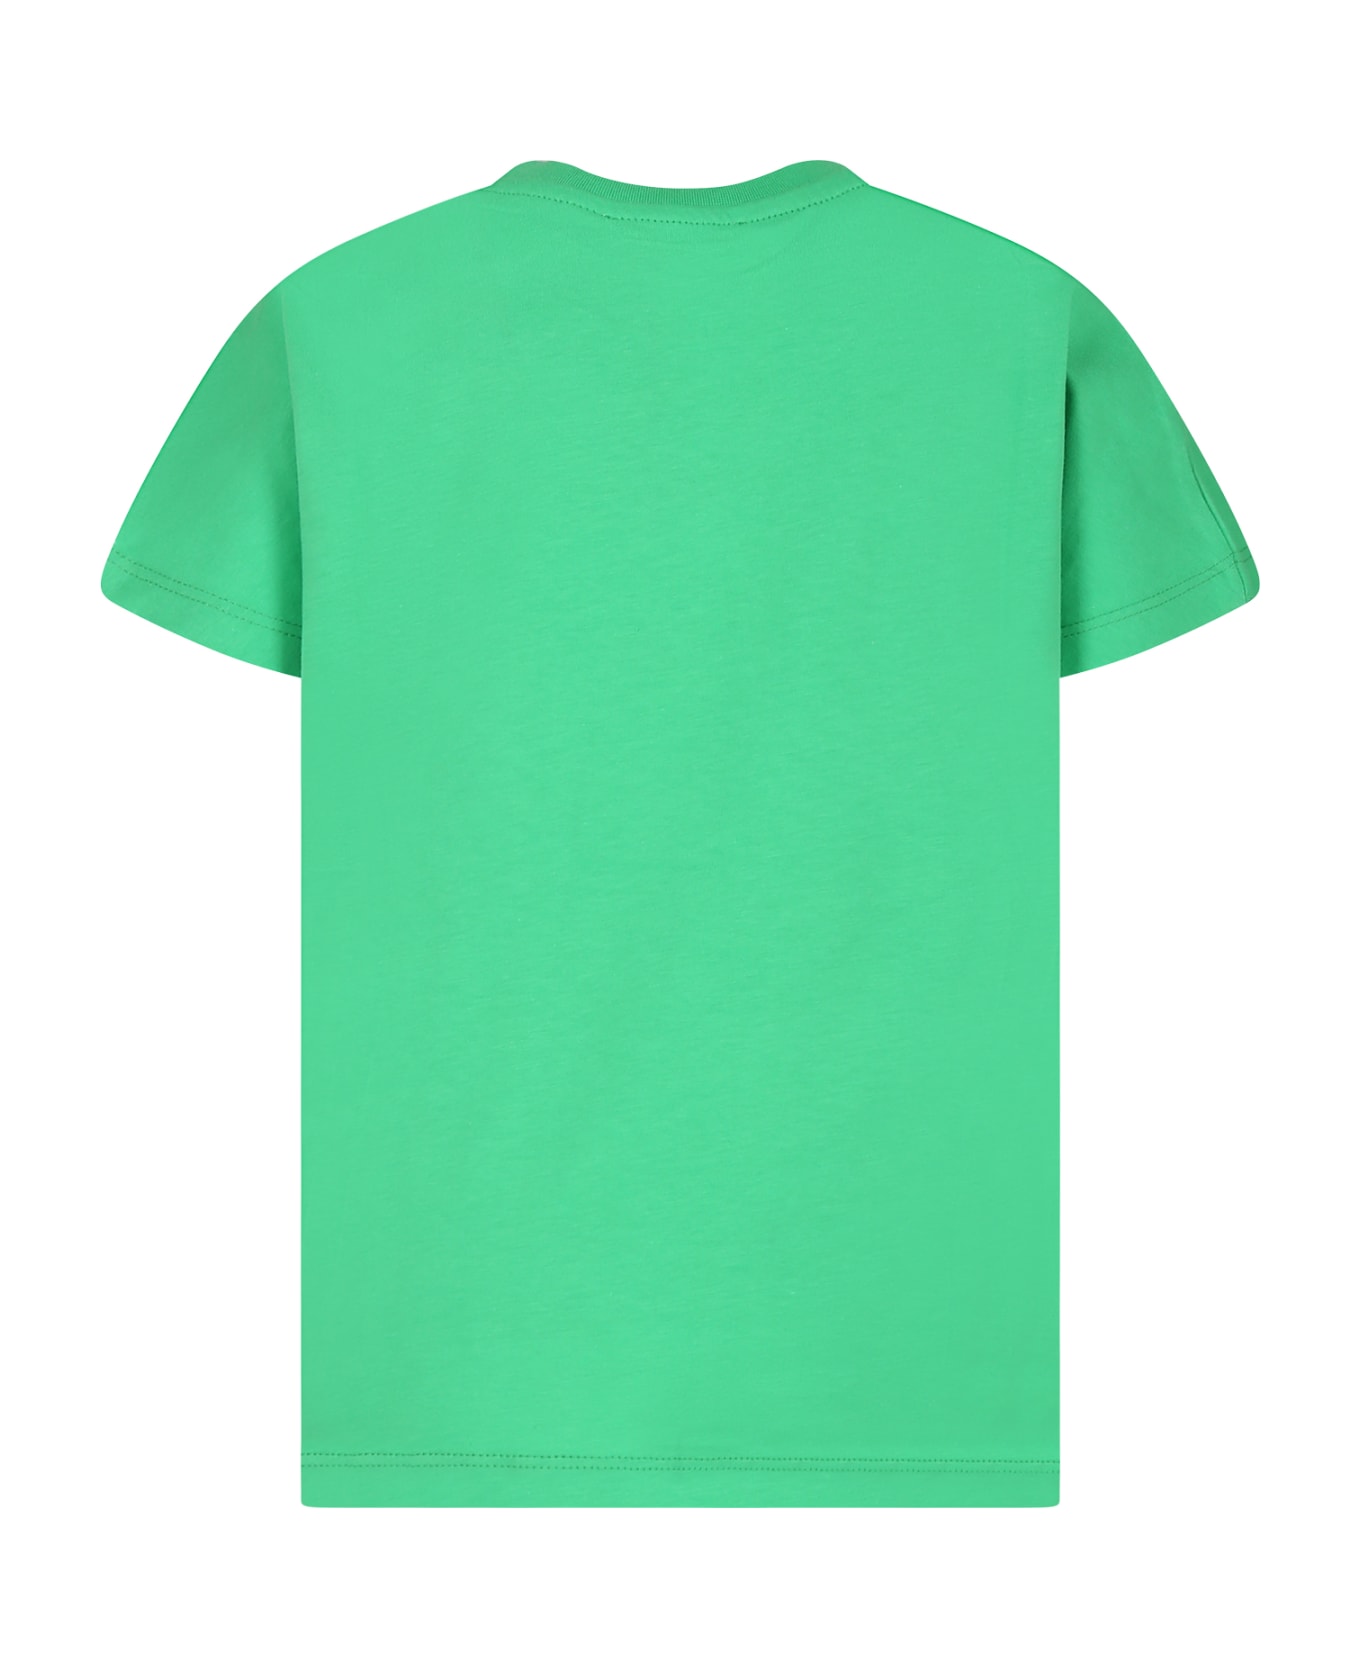 MSGM Green T-shirt For Kids With Logo - Green